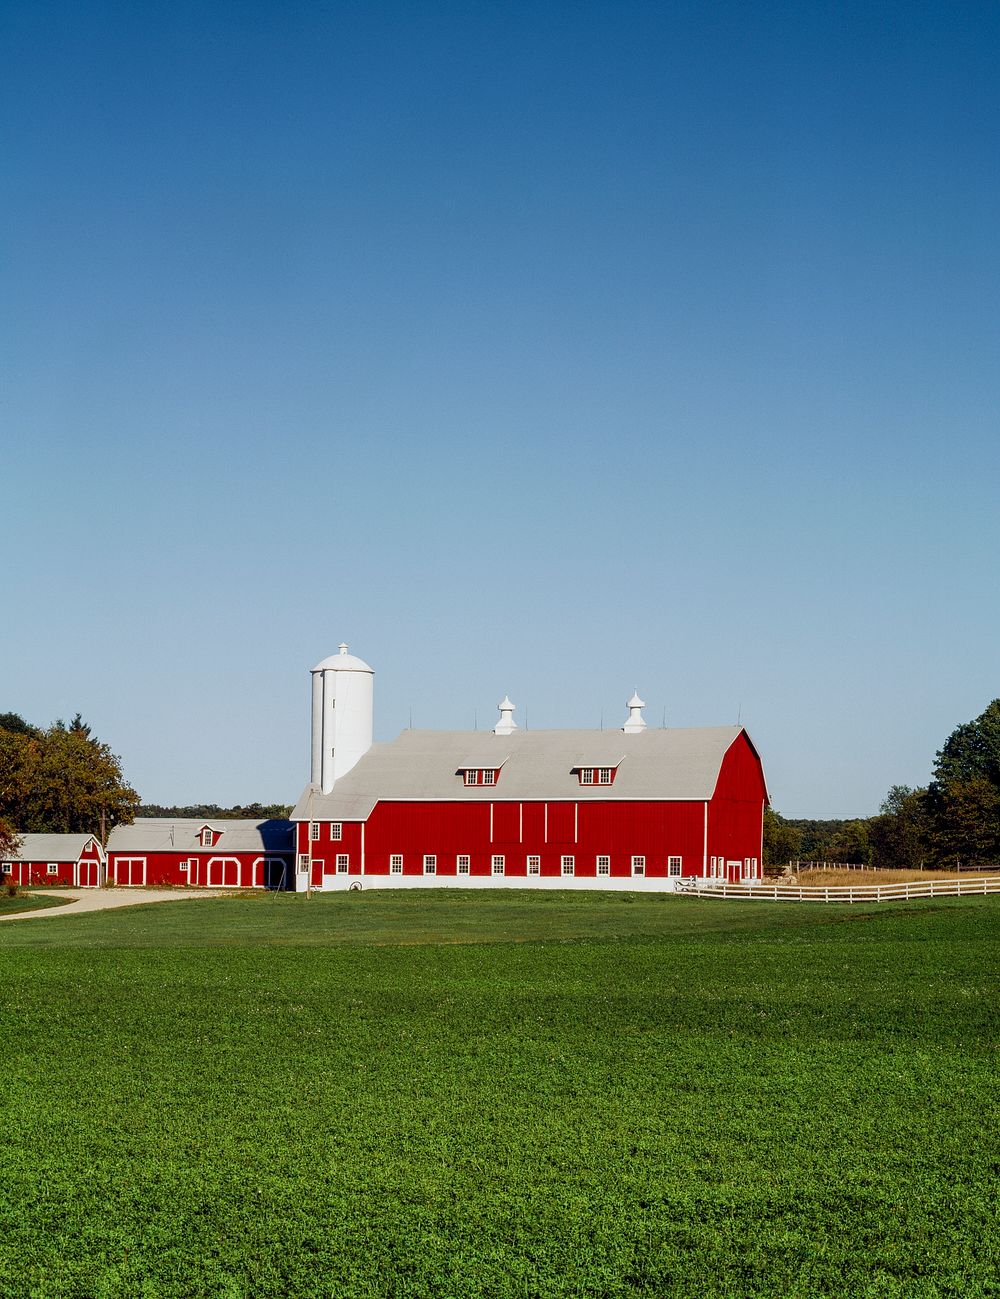 Farm in rural Wisconsin. Original image from Carol M. Highsmith&rsquo;s America, Library of Congress collection. Digitally…